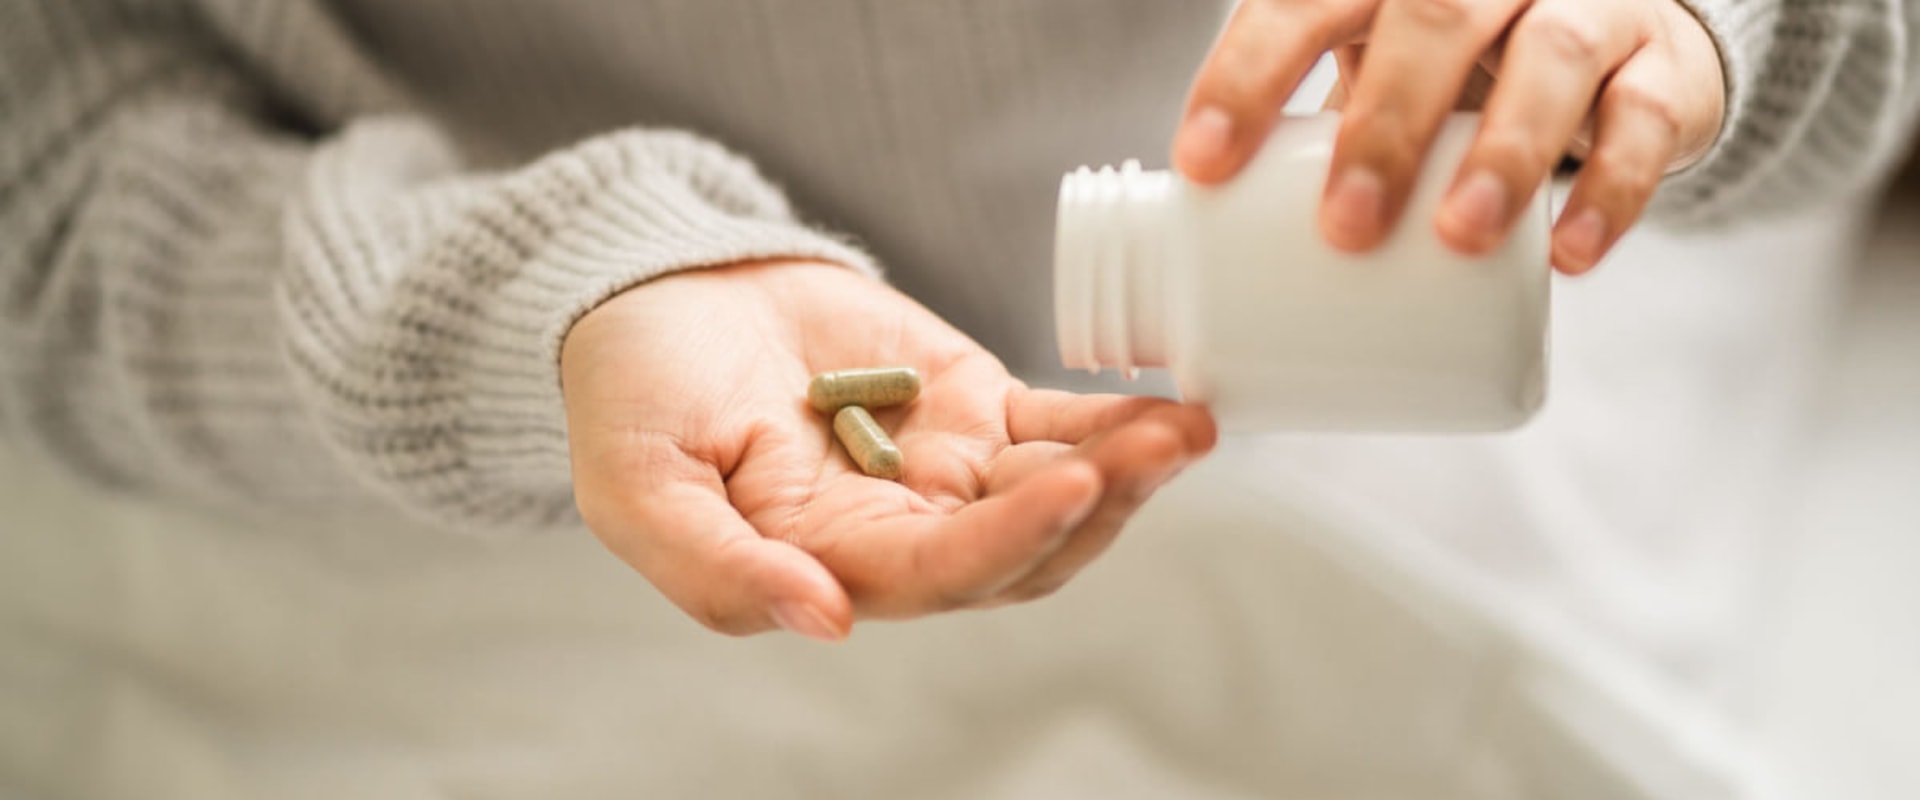 Do Dietary or Herbal Supplements Have an Expiration Date? - An Expert's Perspective